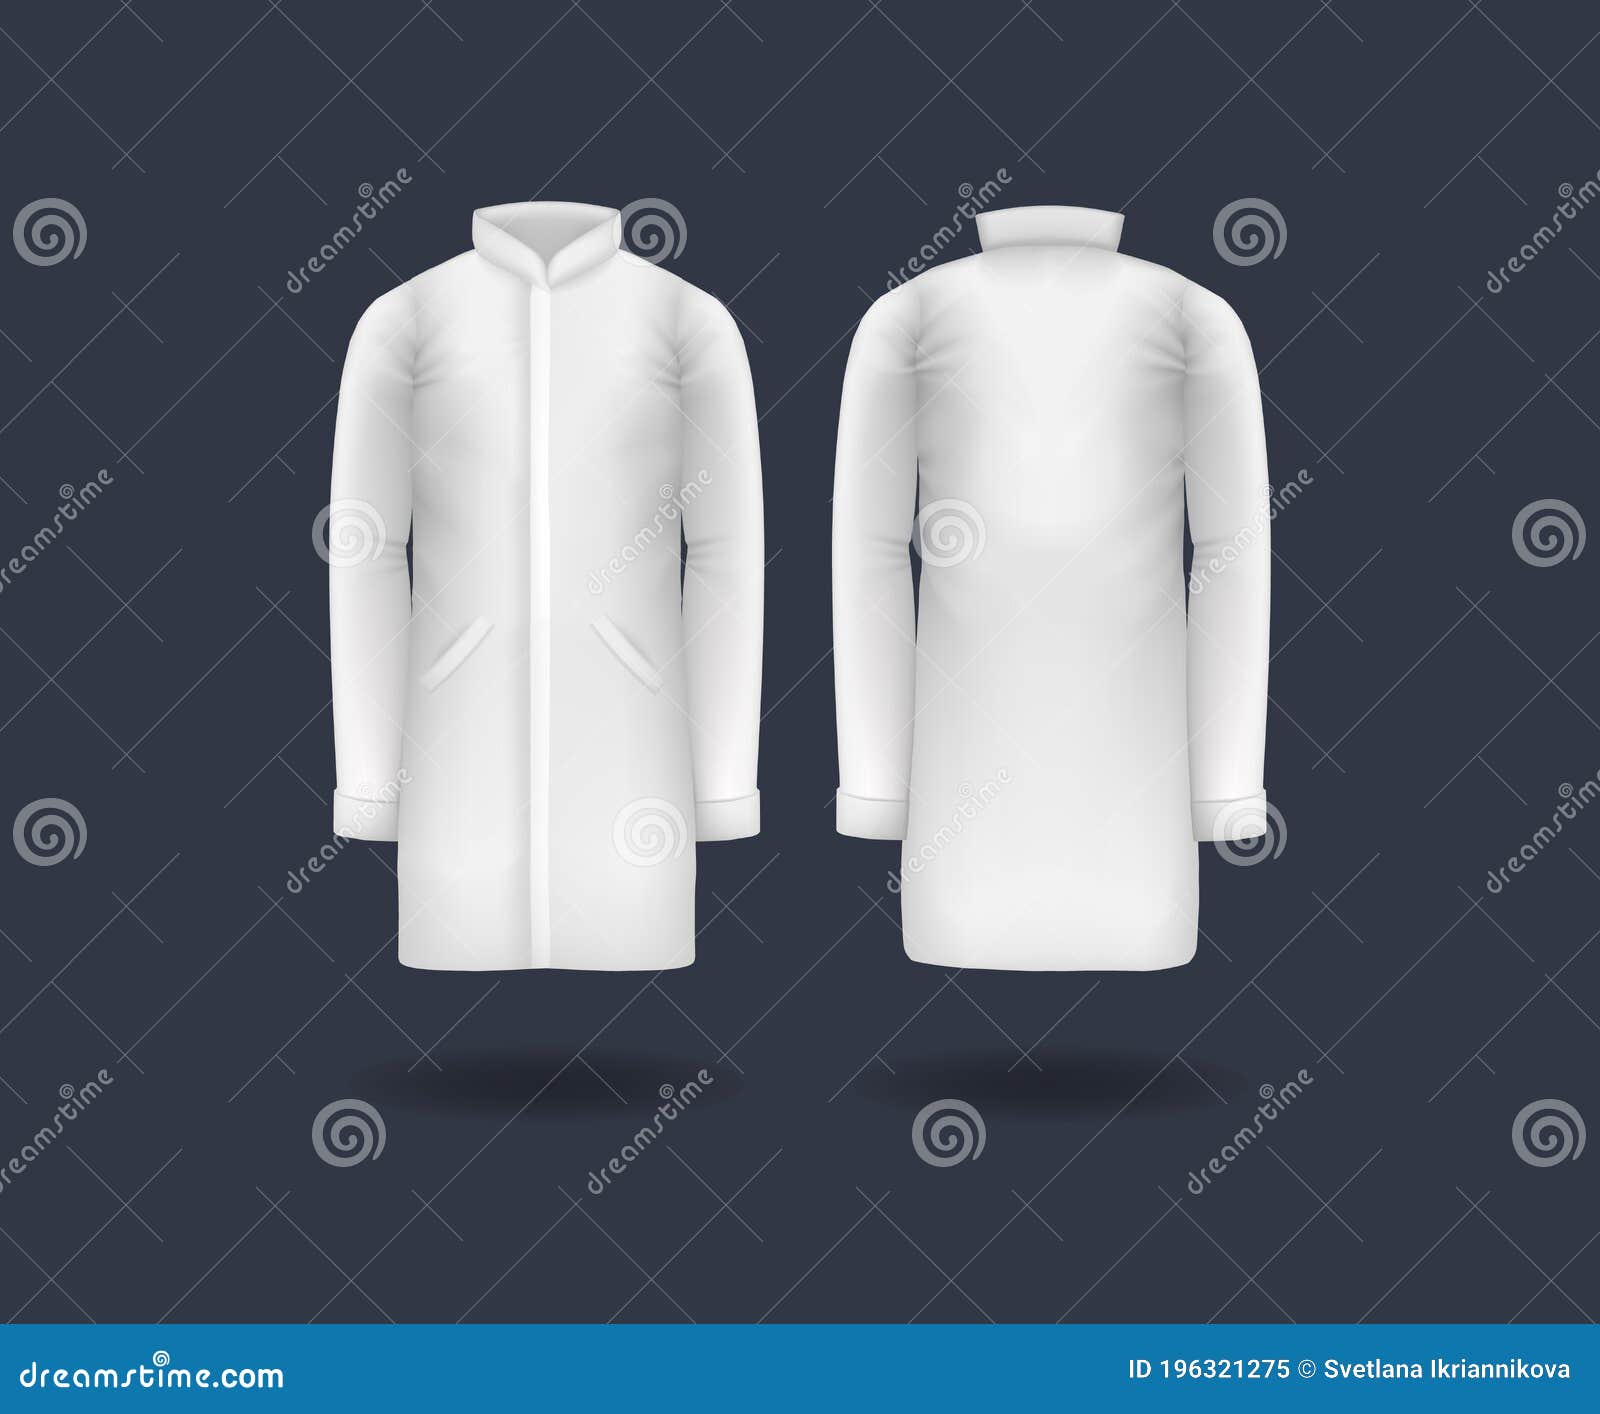 Download Realistic Doctor Coat Mock Up. White Male Medical Gown, Lab Uniform, Doctor Medical Laboratory ...